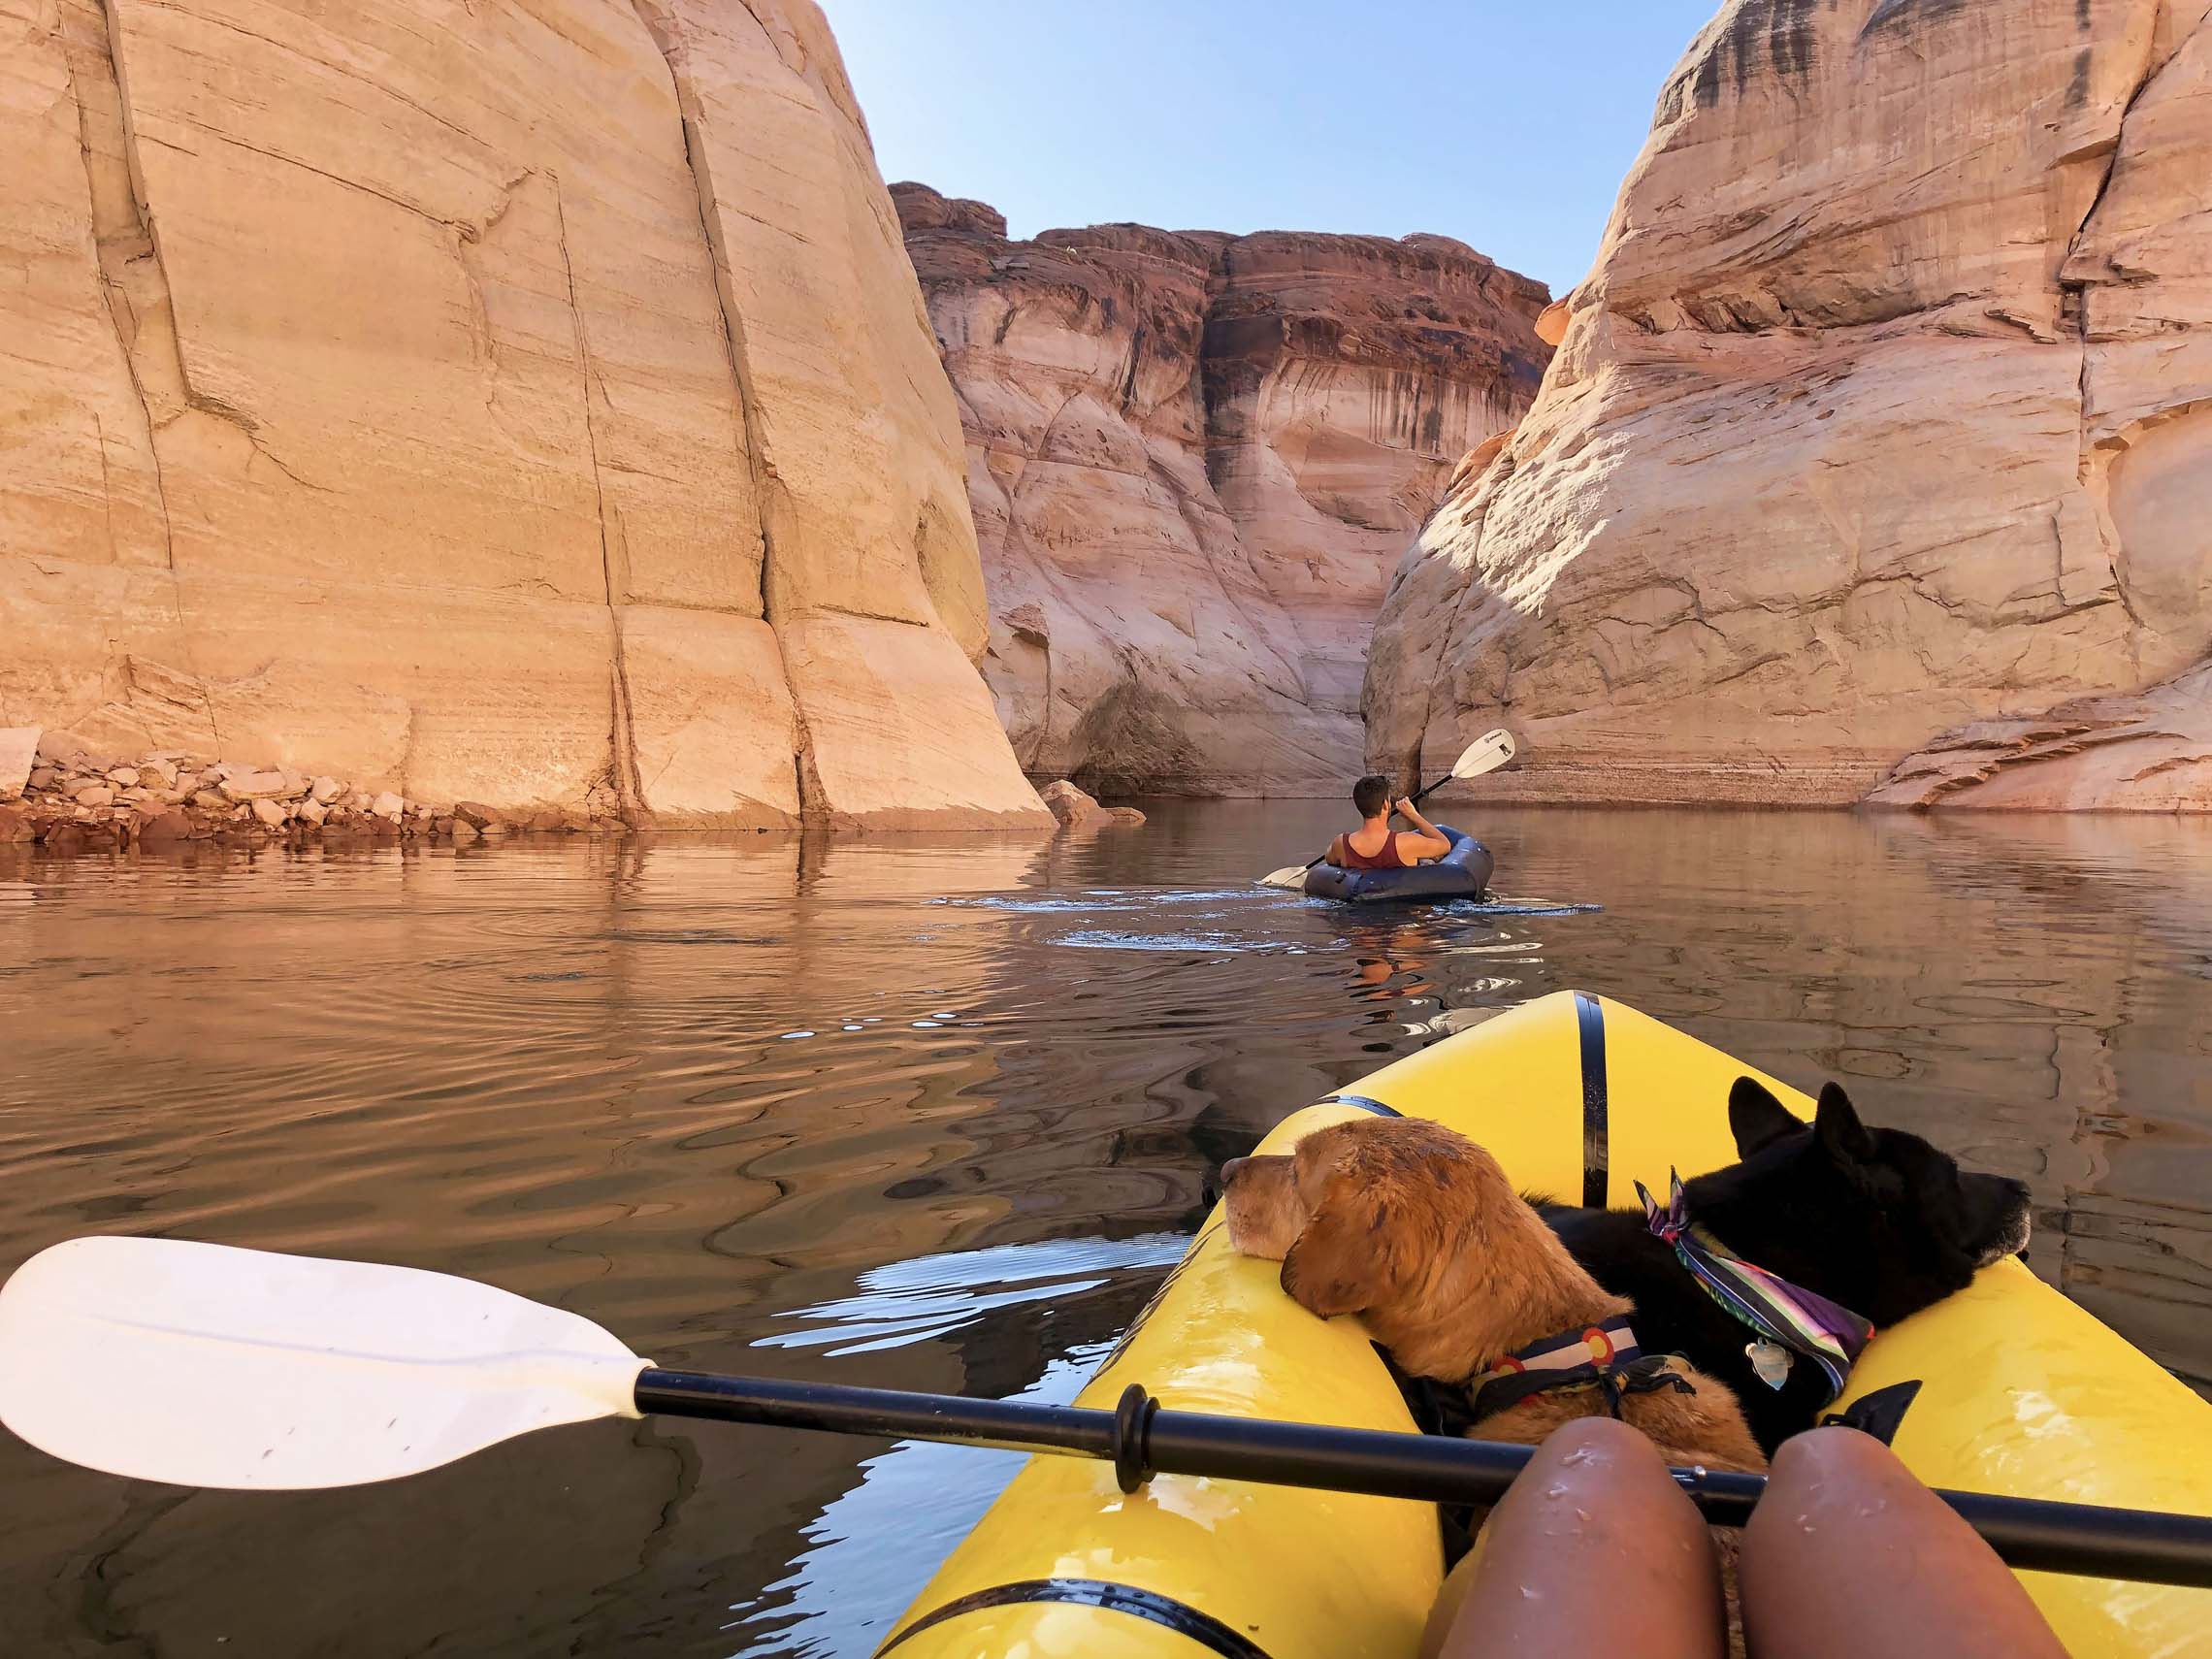 Dog and a person inside a packraft on water surrounded by boulders. Vanlife to packrafting put-ins